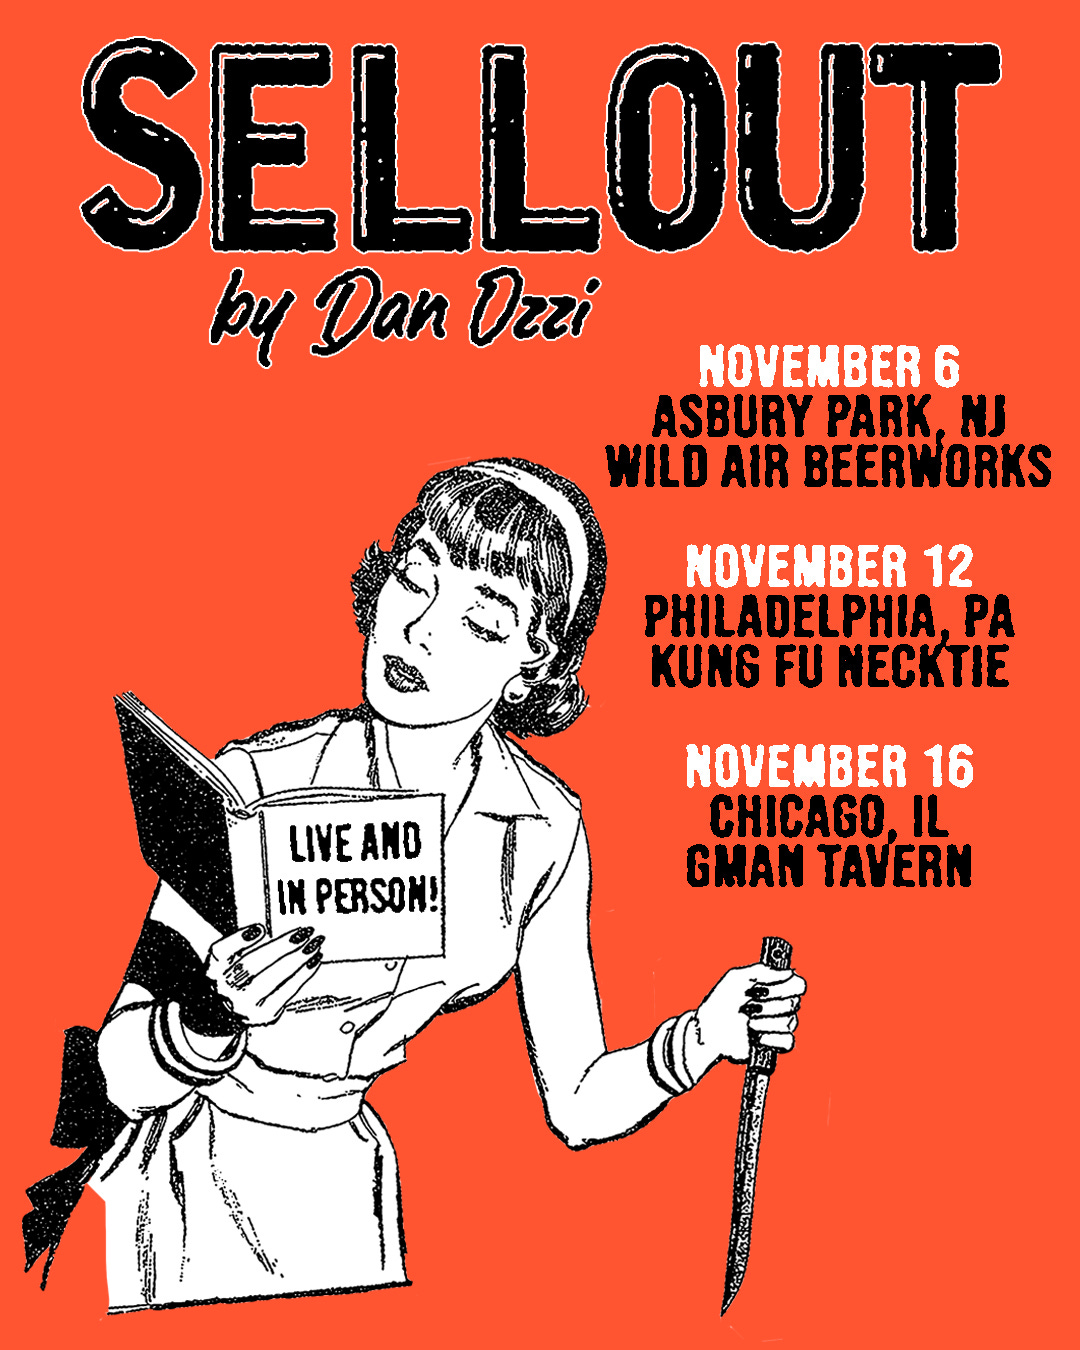 SELLOUT is coming to New Jersey, Philly, and Chicago! picture